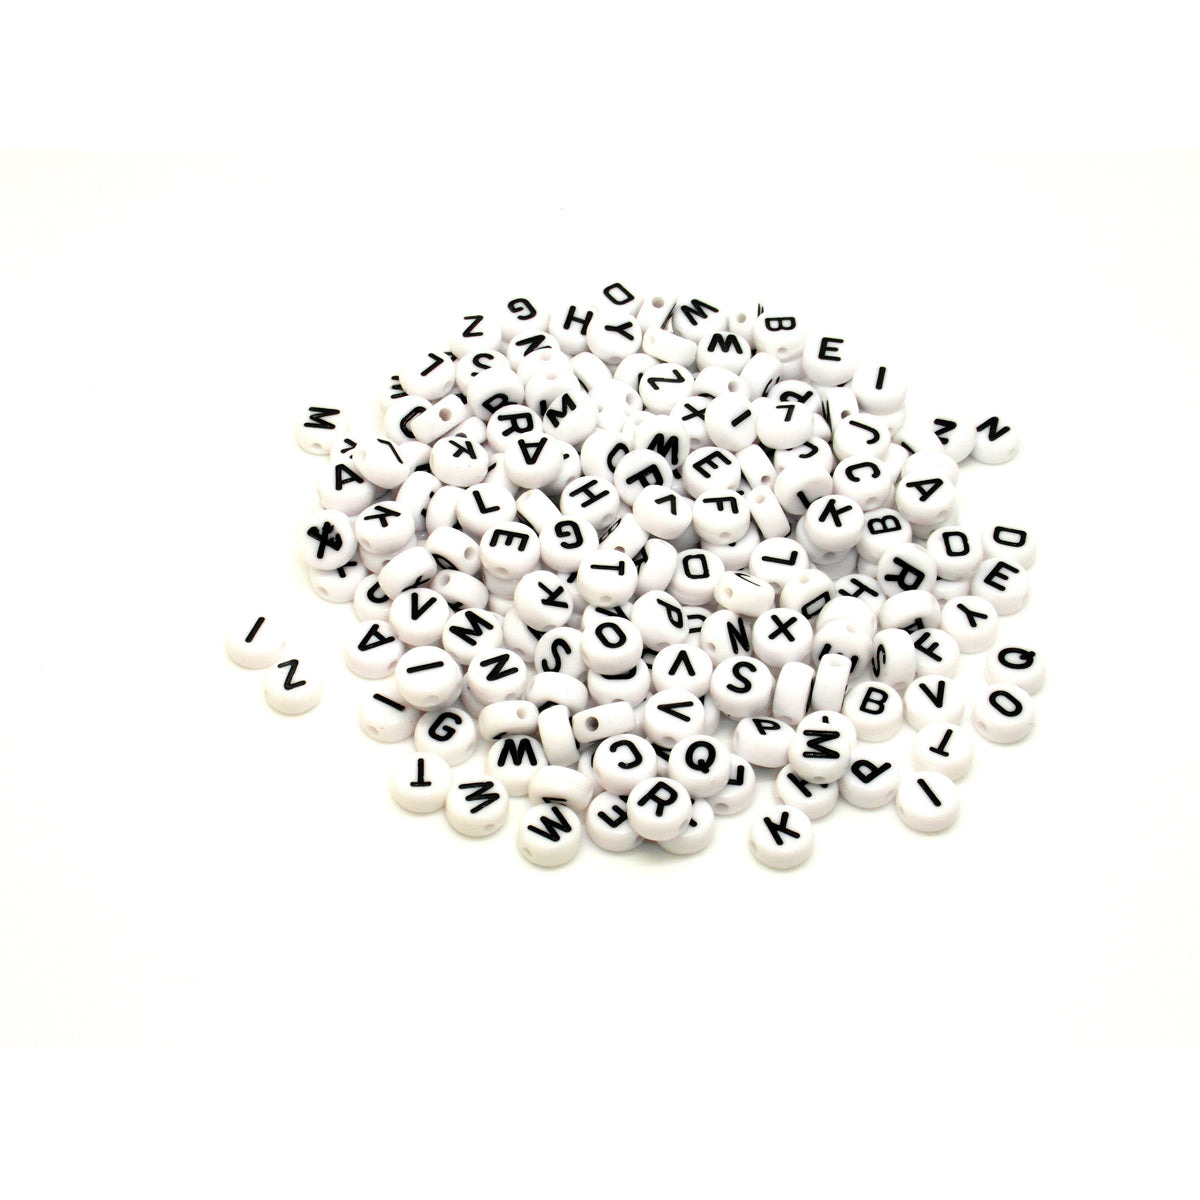 Plastic White 7mm Round Number Beads, Single Numbers, 100 beads - Bead Bee